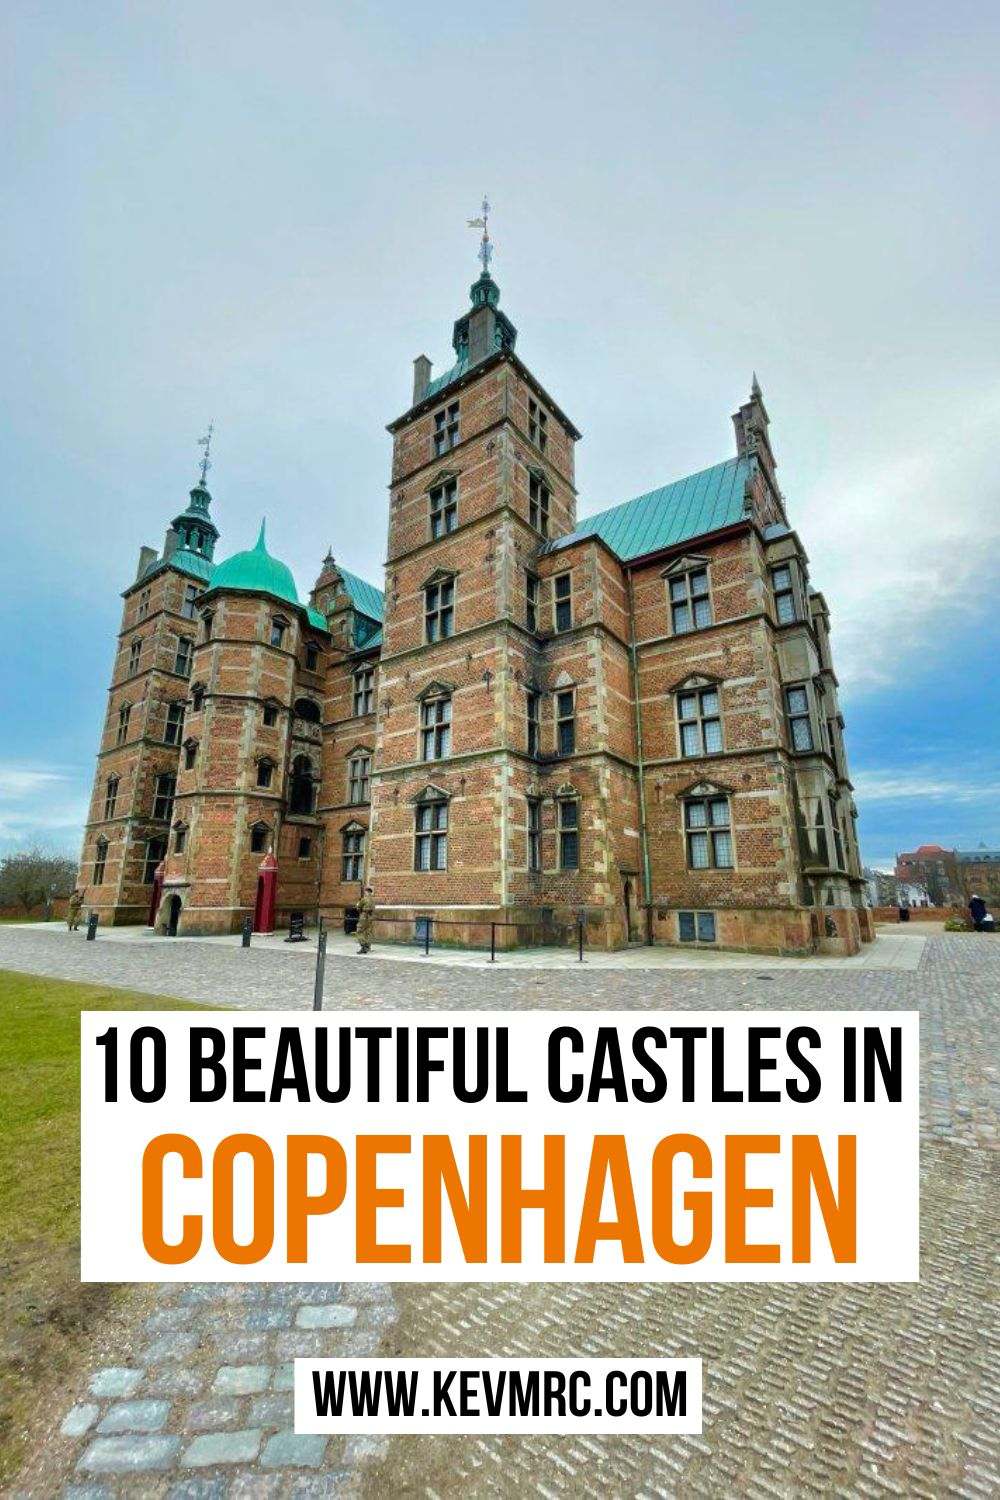 When visiting Copenhagen, you simply can't miss its fairytale castles which are absolutely great attractions to visit. NB: some of them are a bit outside the city, but worth the look! copenhagen castles | copenhagen denmark travel #copenhagen